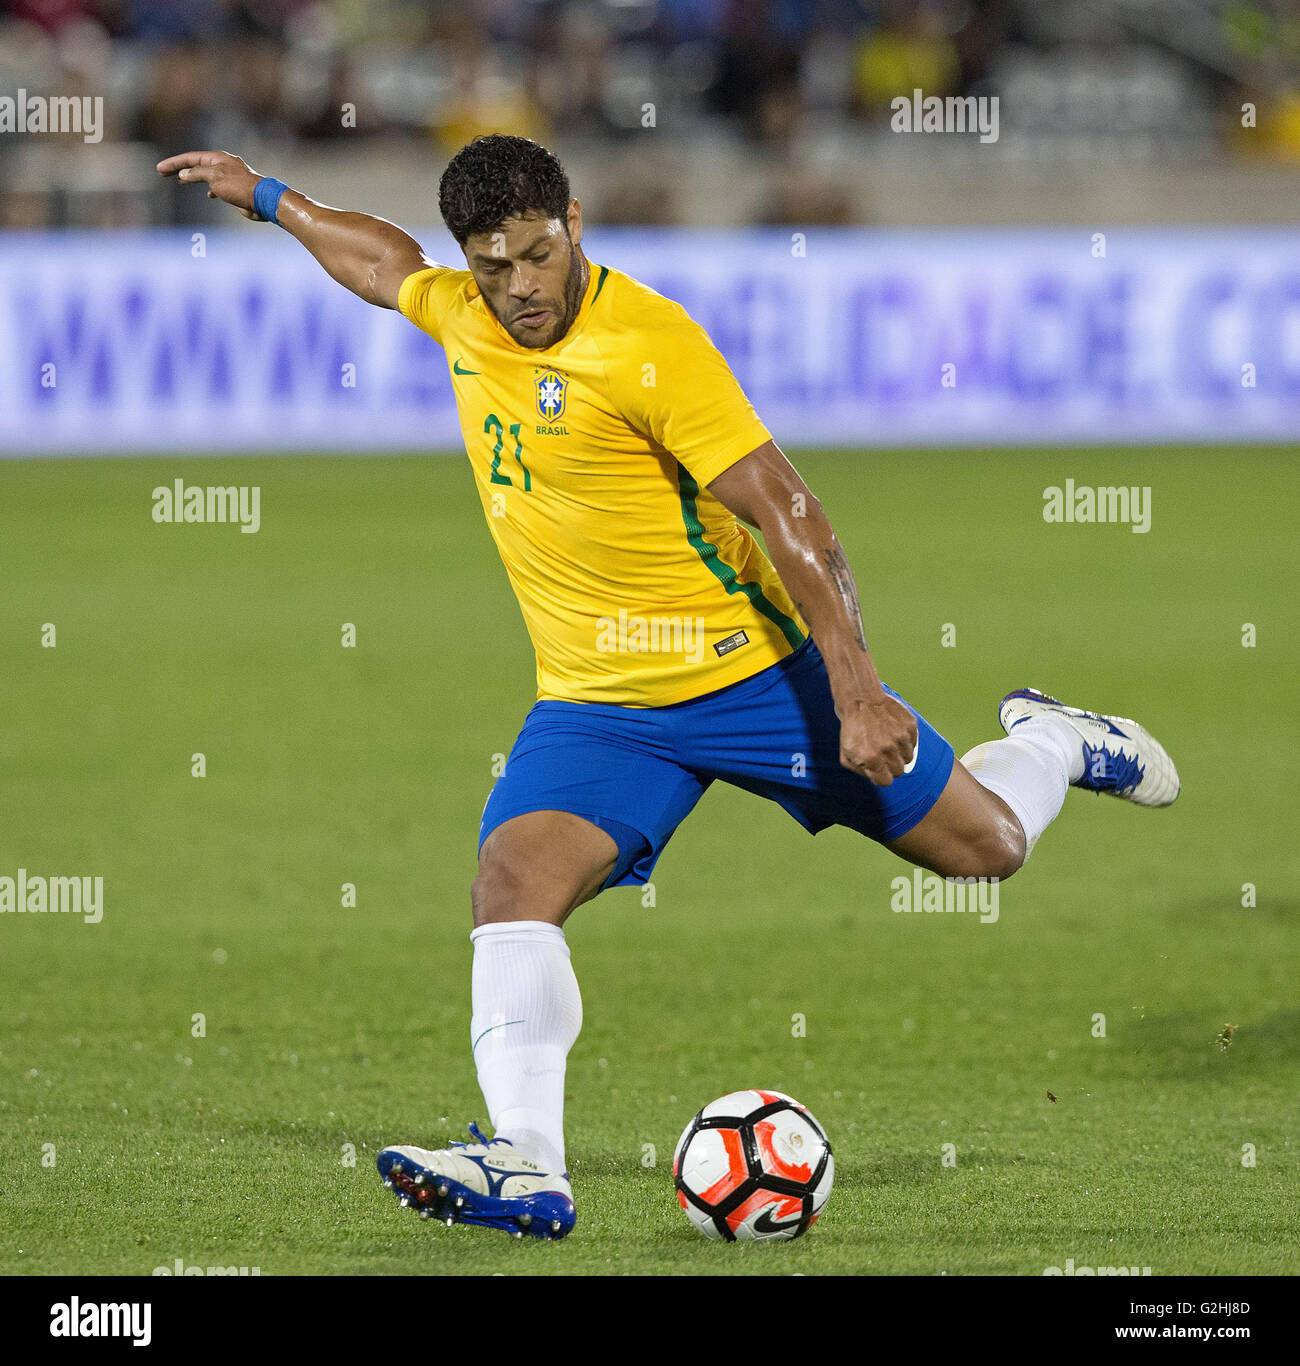 Commerce City, Colorado, USA. 29th May, 2016. Brazil's HULK readies to kick the ball at the Panama goal during a friendly match against Panama before the Copa de Oro at Dicks Sporting Goods Park Sunday Evening. Brazil beats Panama 2-0. © Hector Acevedo/ZUMA Wire/Alamy Live News Stock Photo